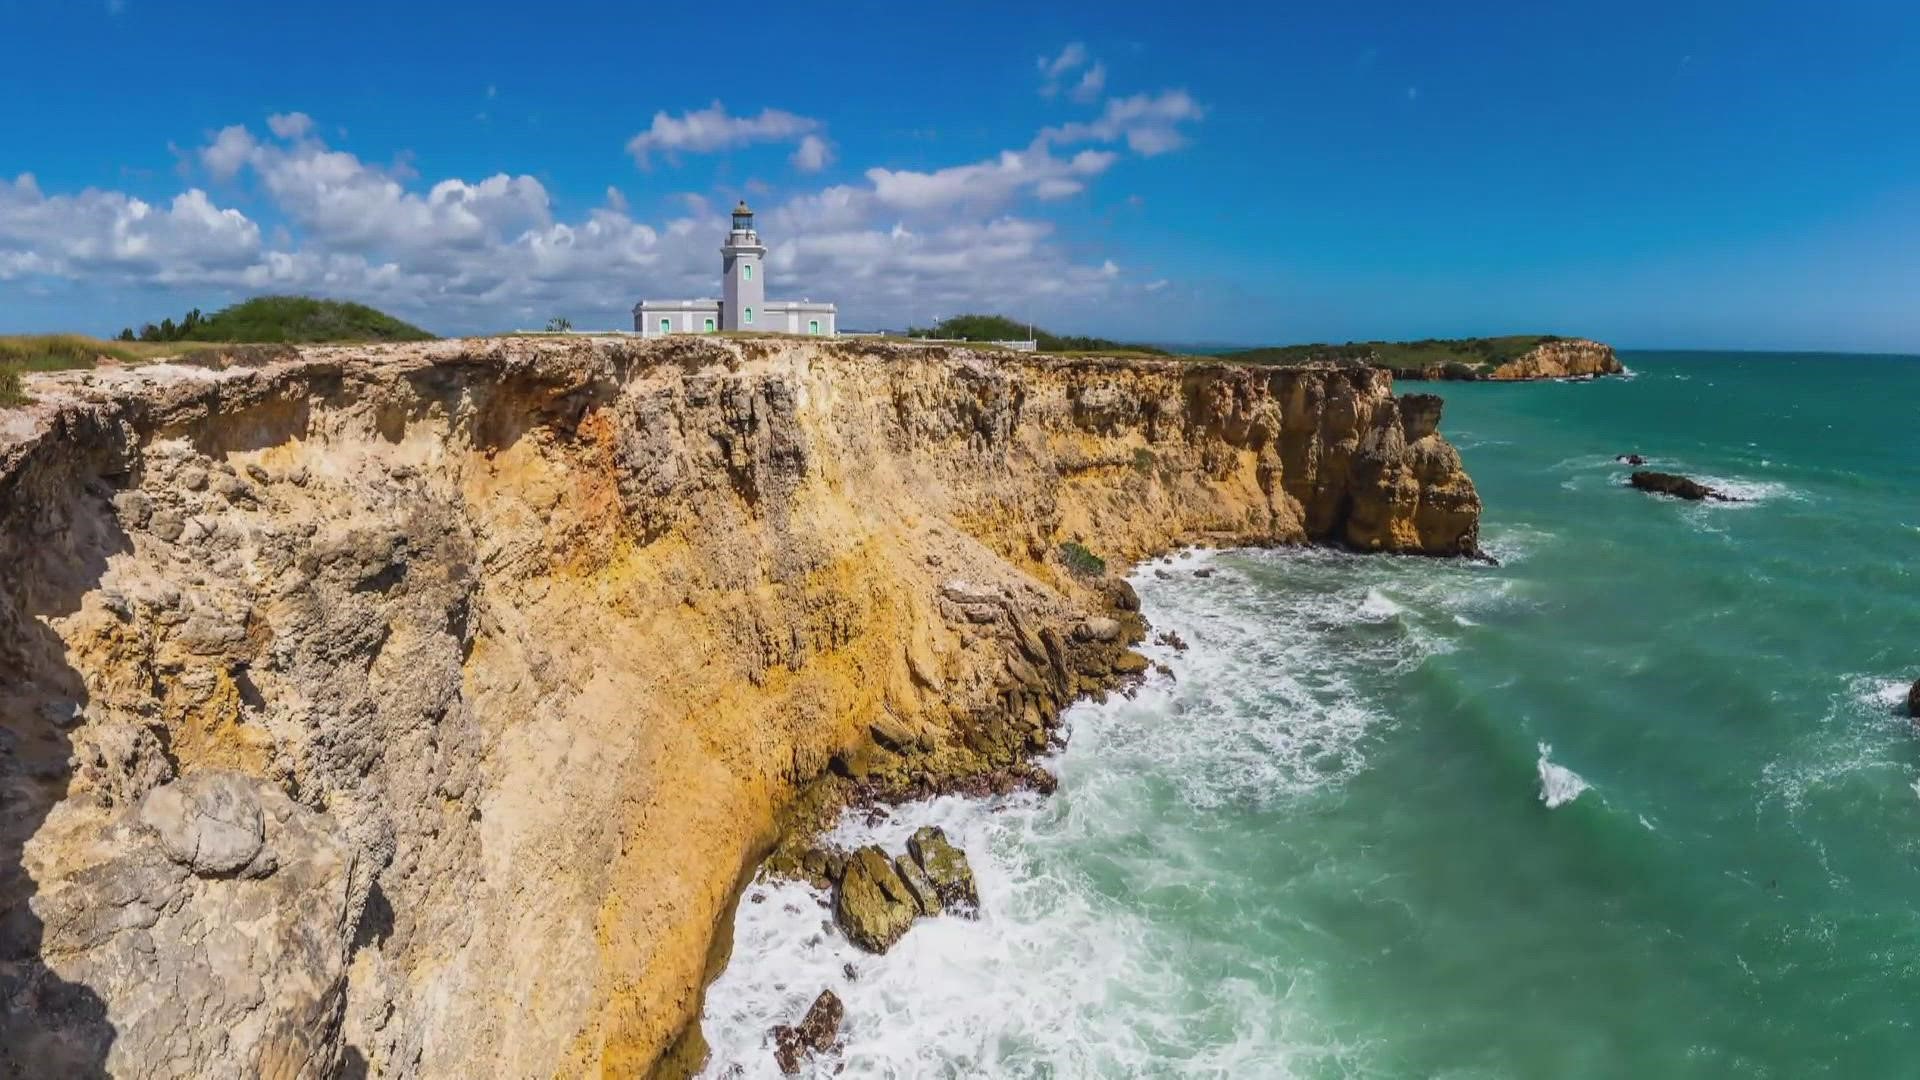 Edgar Garay, 27, was on a day trip to the southwestern coast of Puerto Rico when a witness said they saw him stumble toward the edge of the cliff Sunday evening.